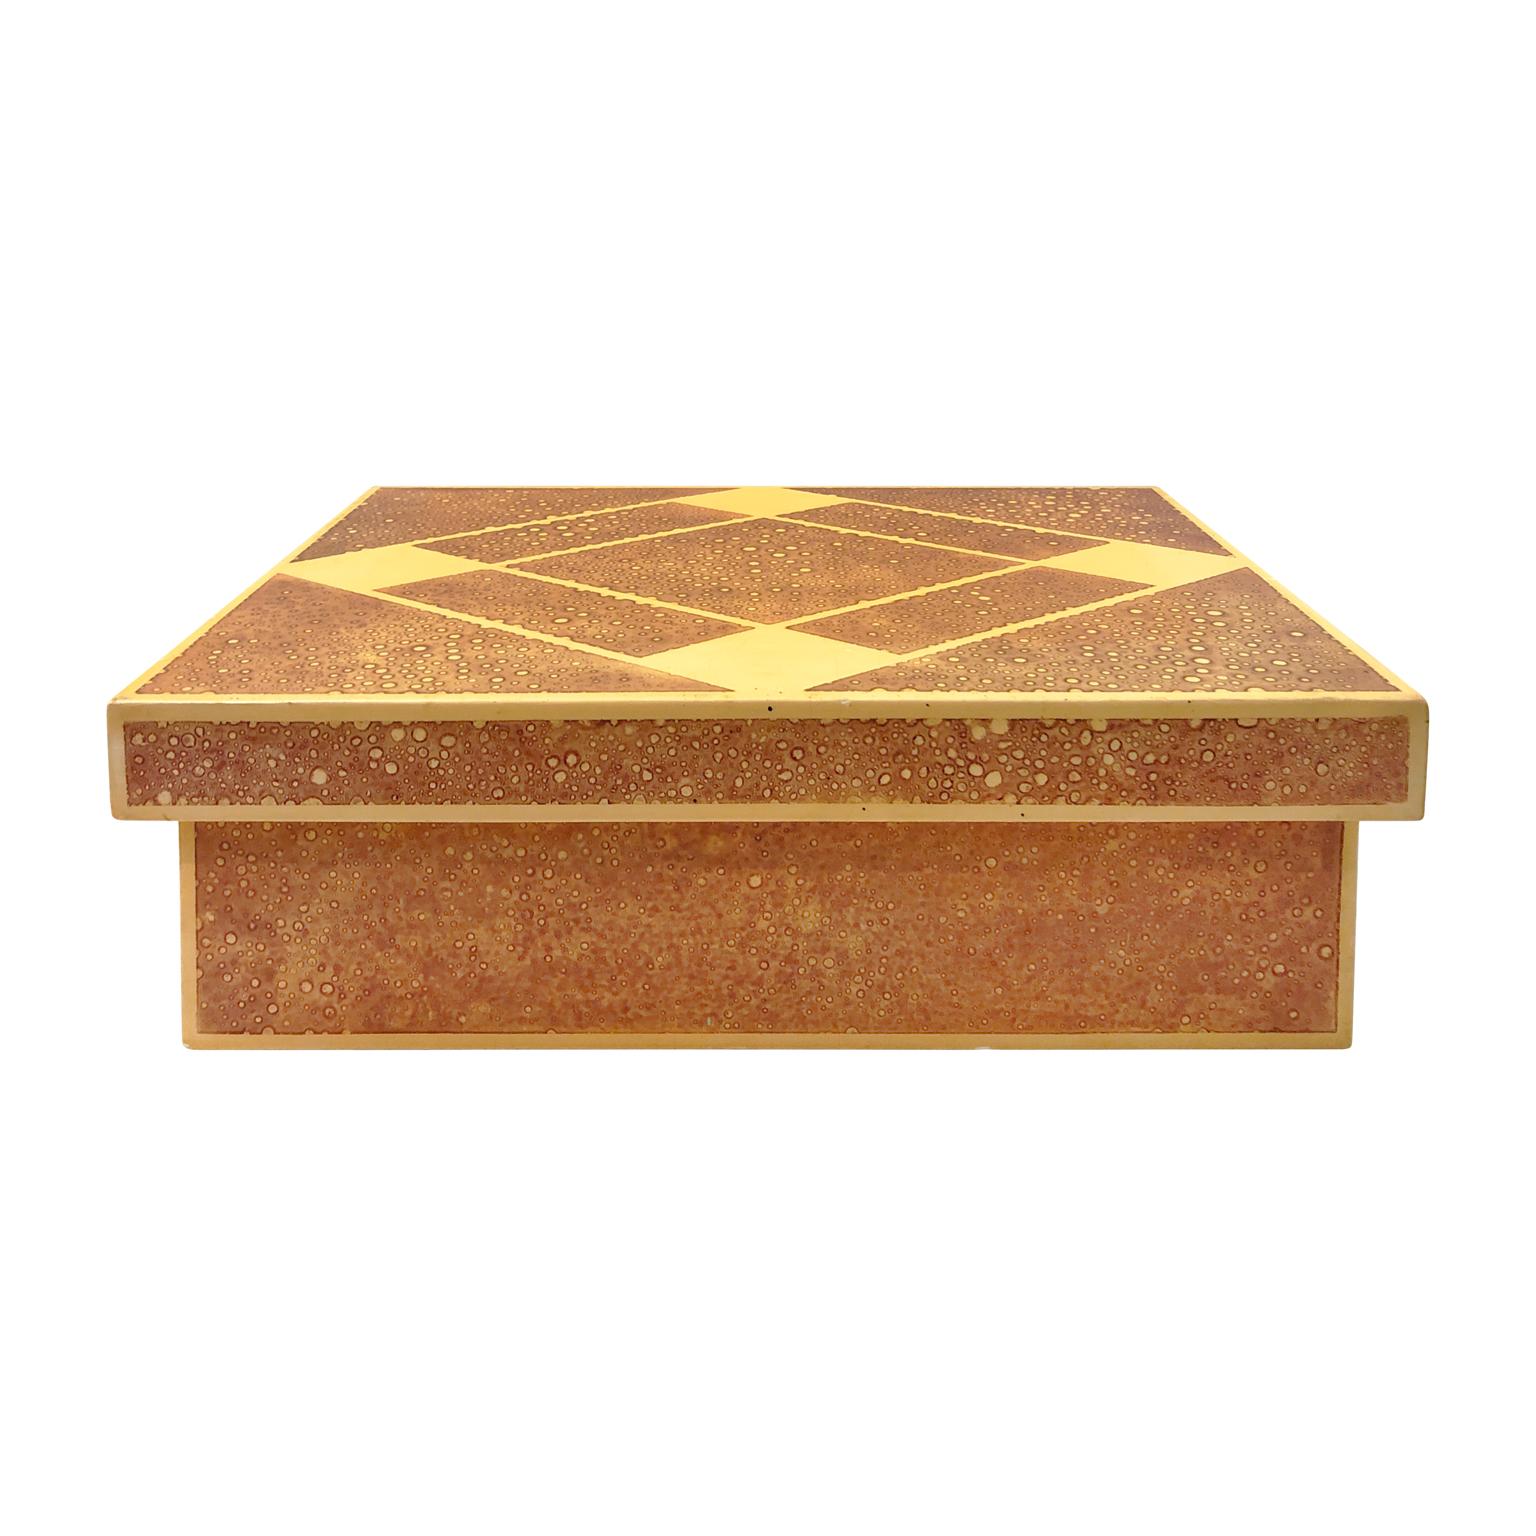 Rectangular lacquered box with diamond patterned lid, USA, 1970s.